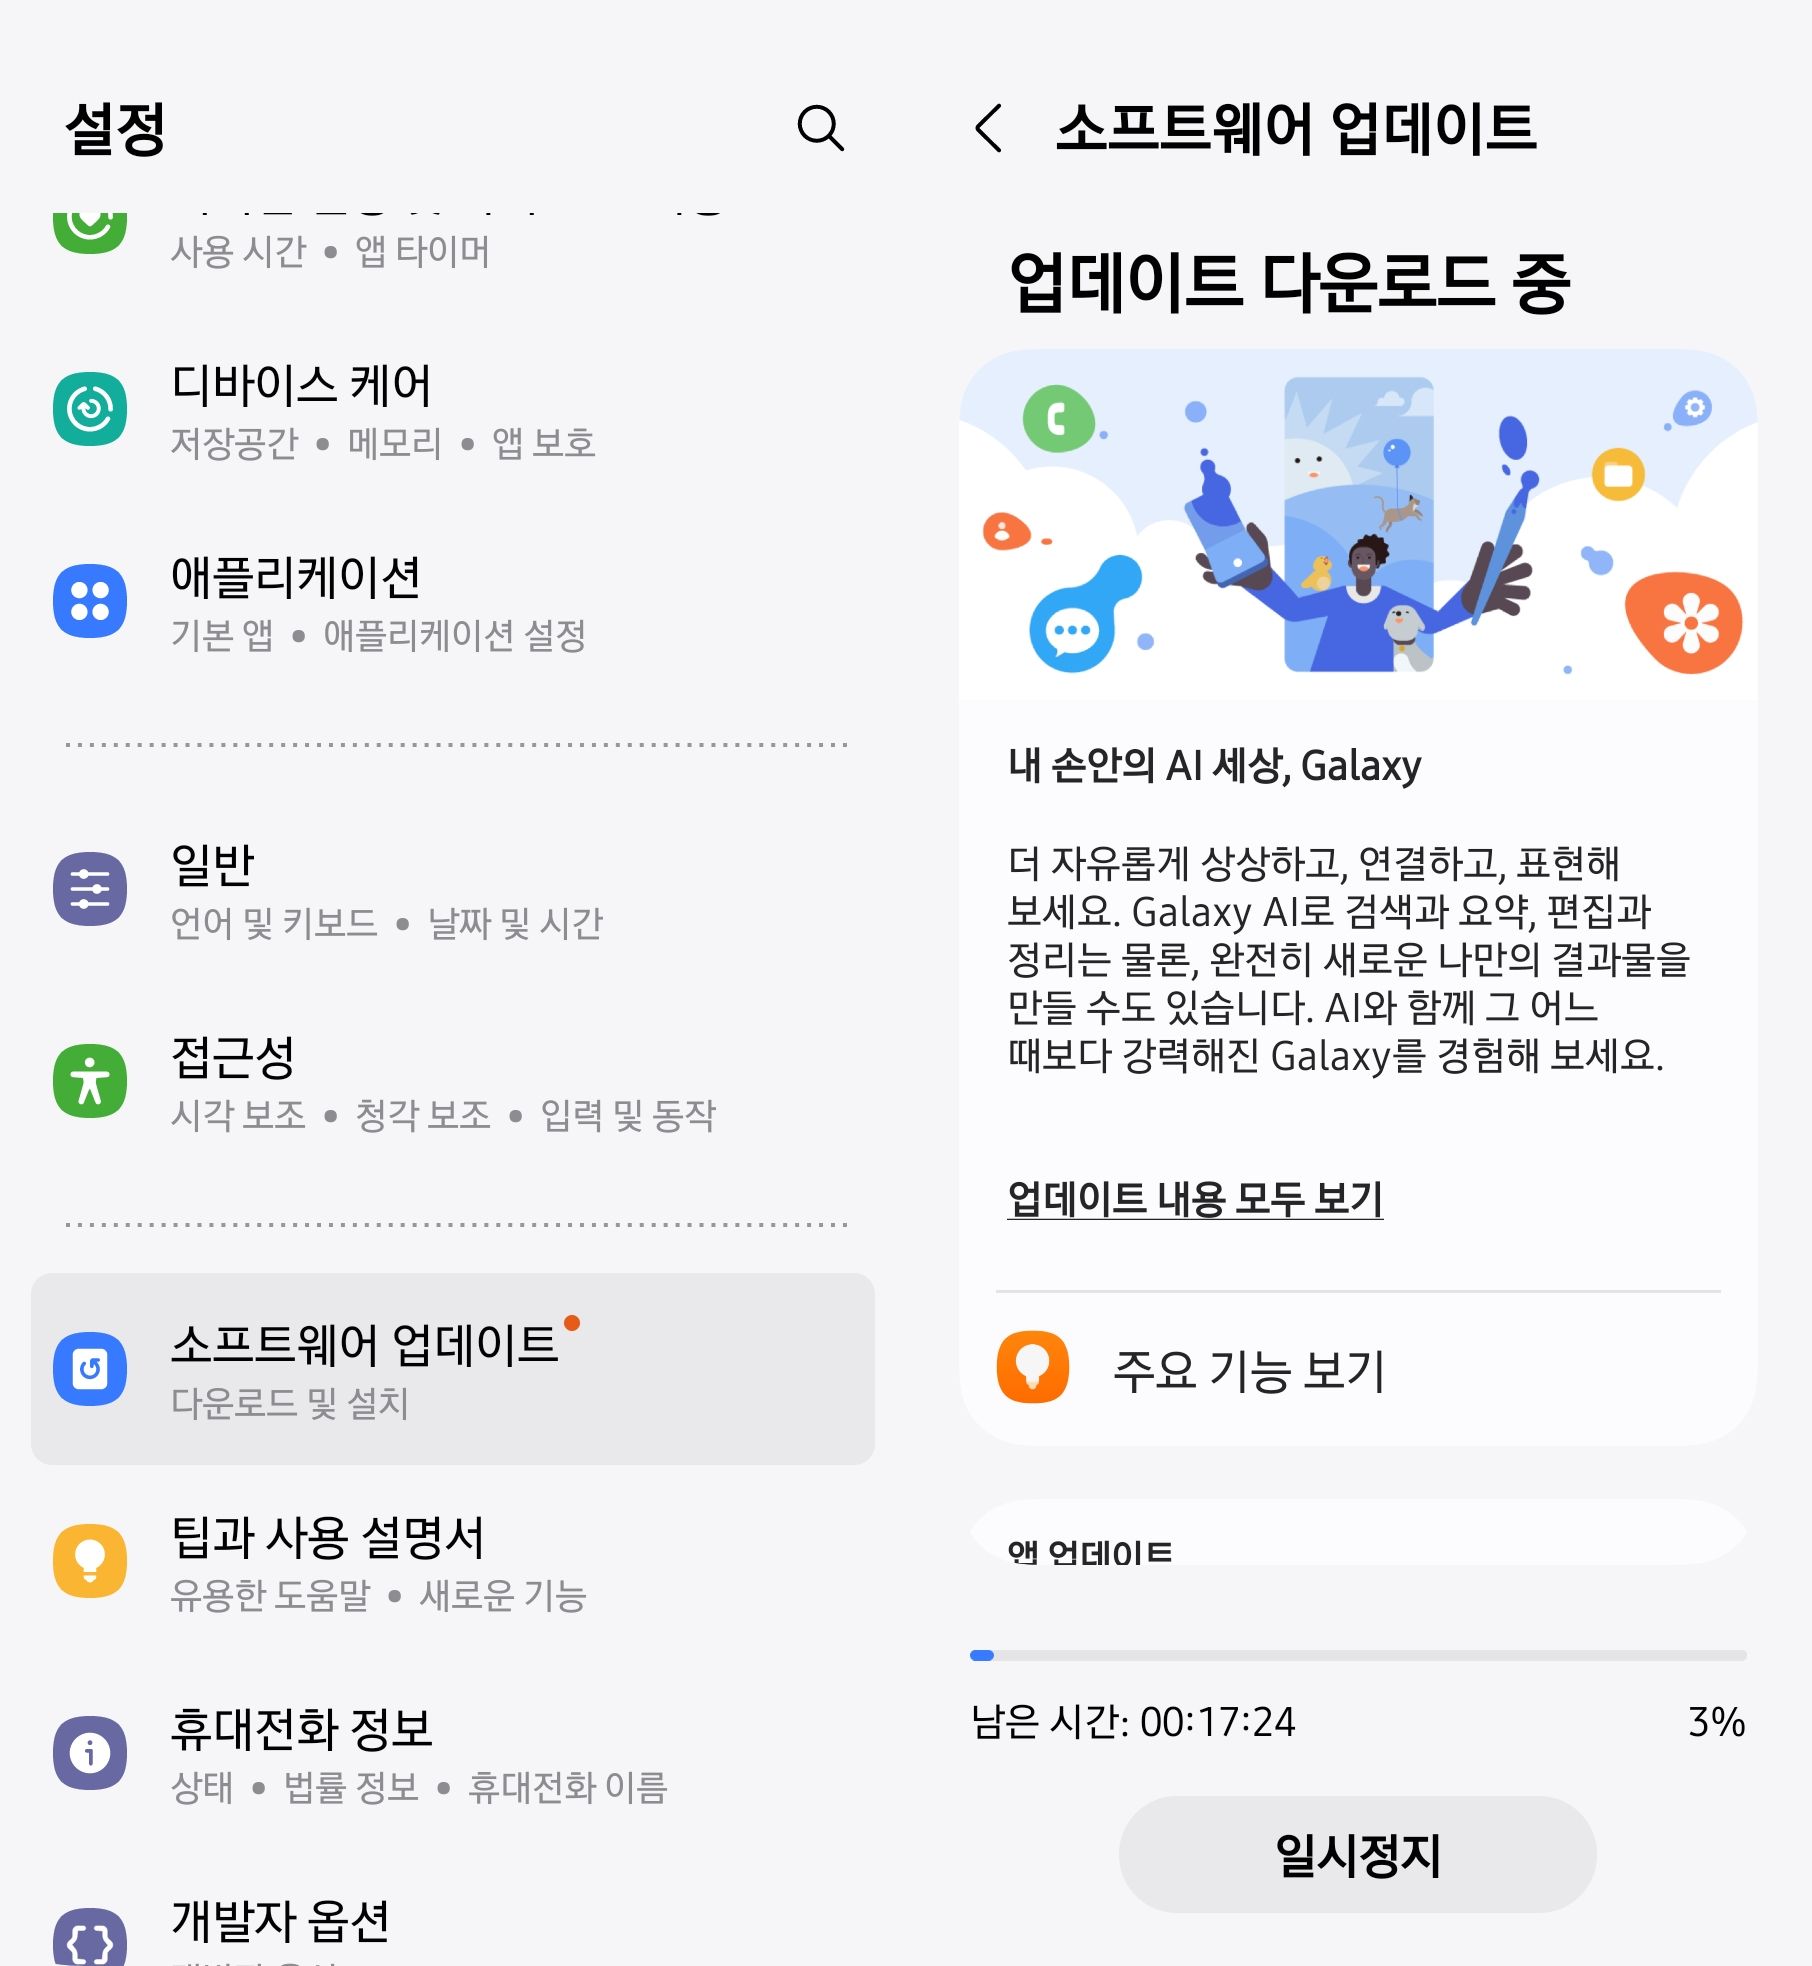 Samsung rolls out One UI 6.1 with Galaxy AI to Galaxy S21 series and its previous gen foldables